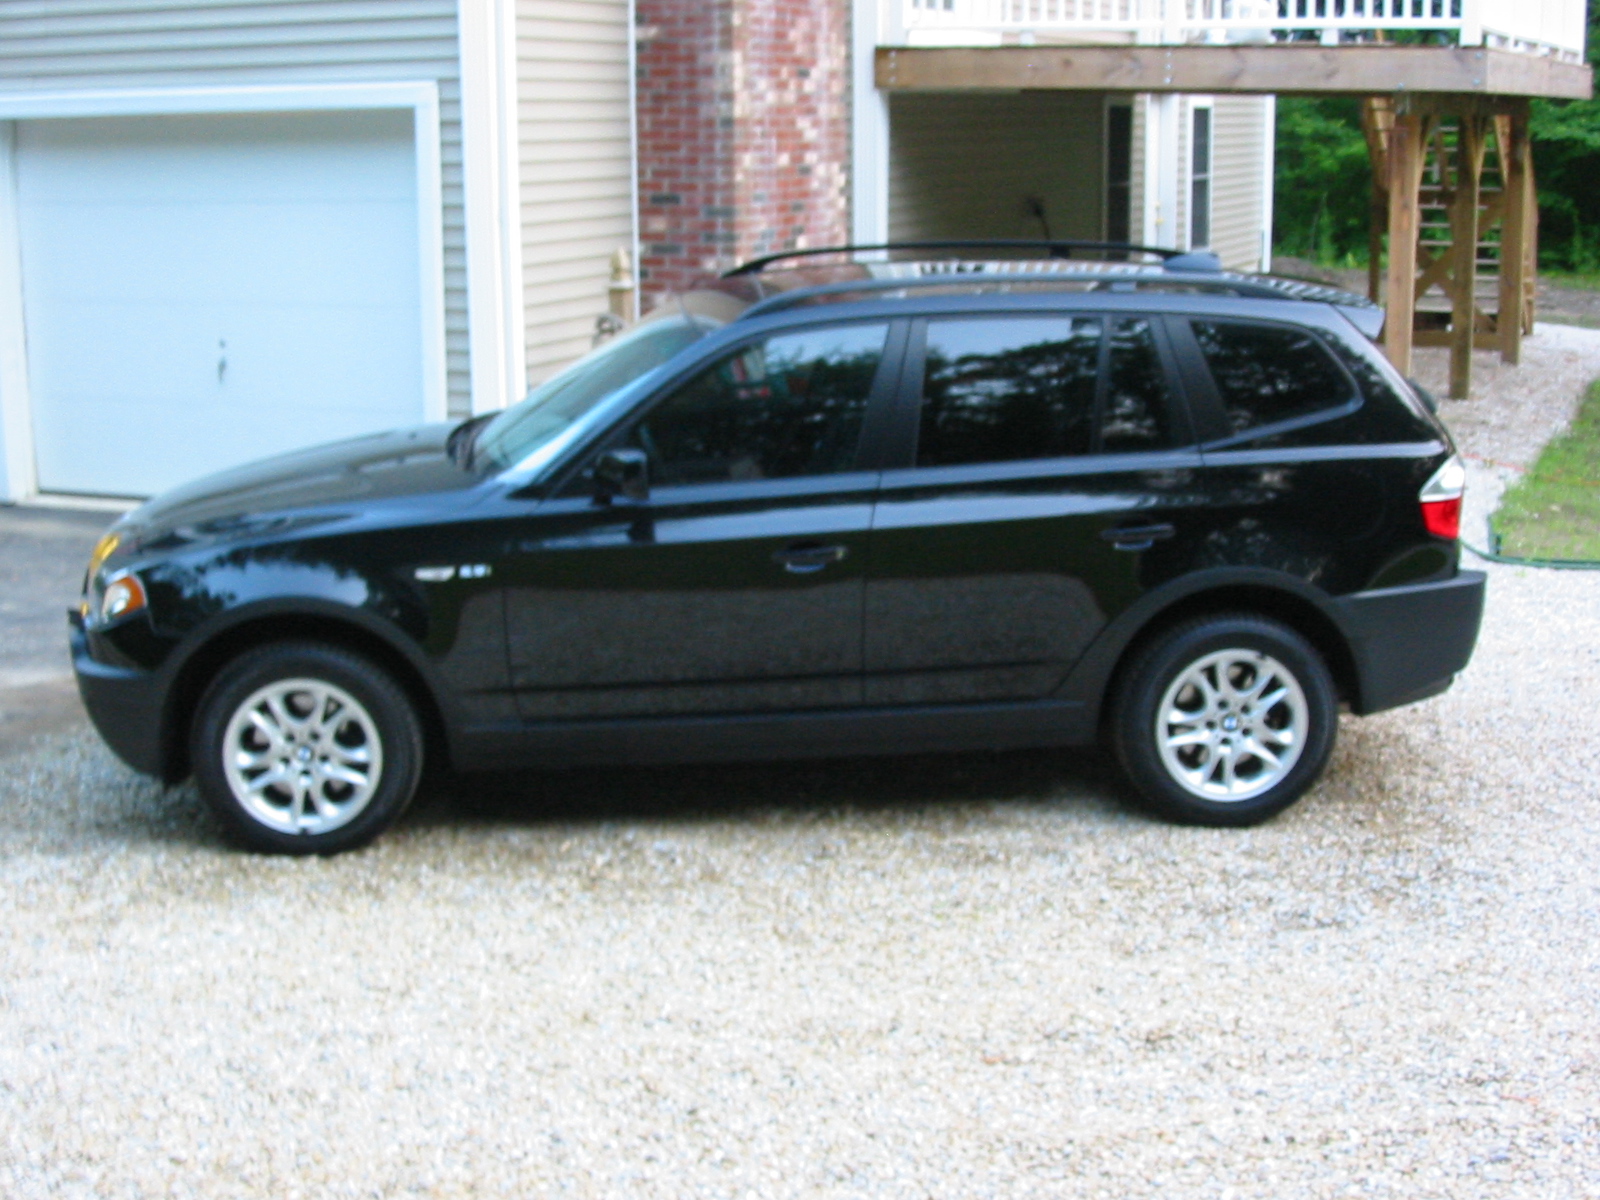 Bmw x3 25i. Best photos and information of modification.